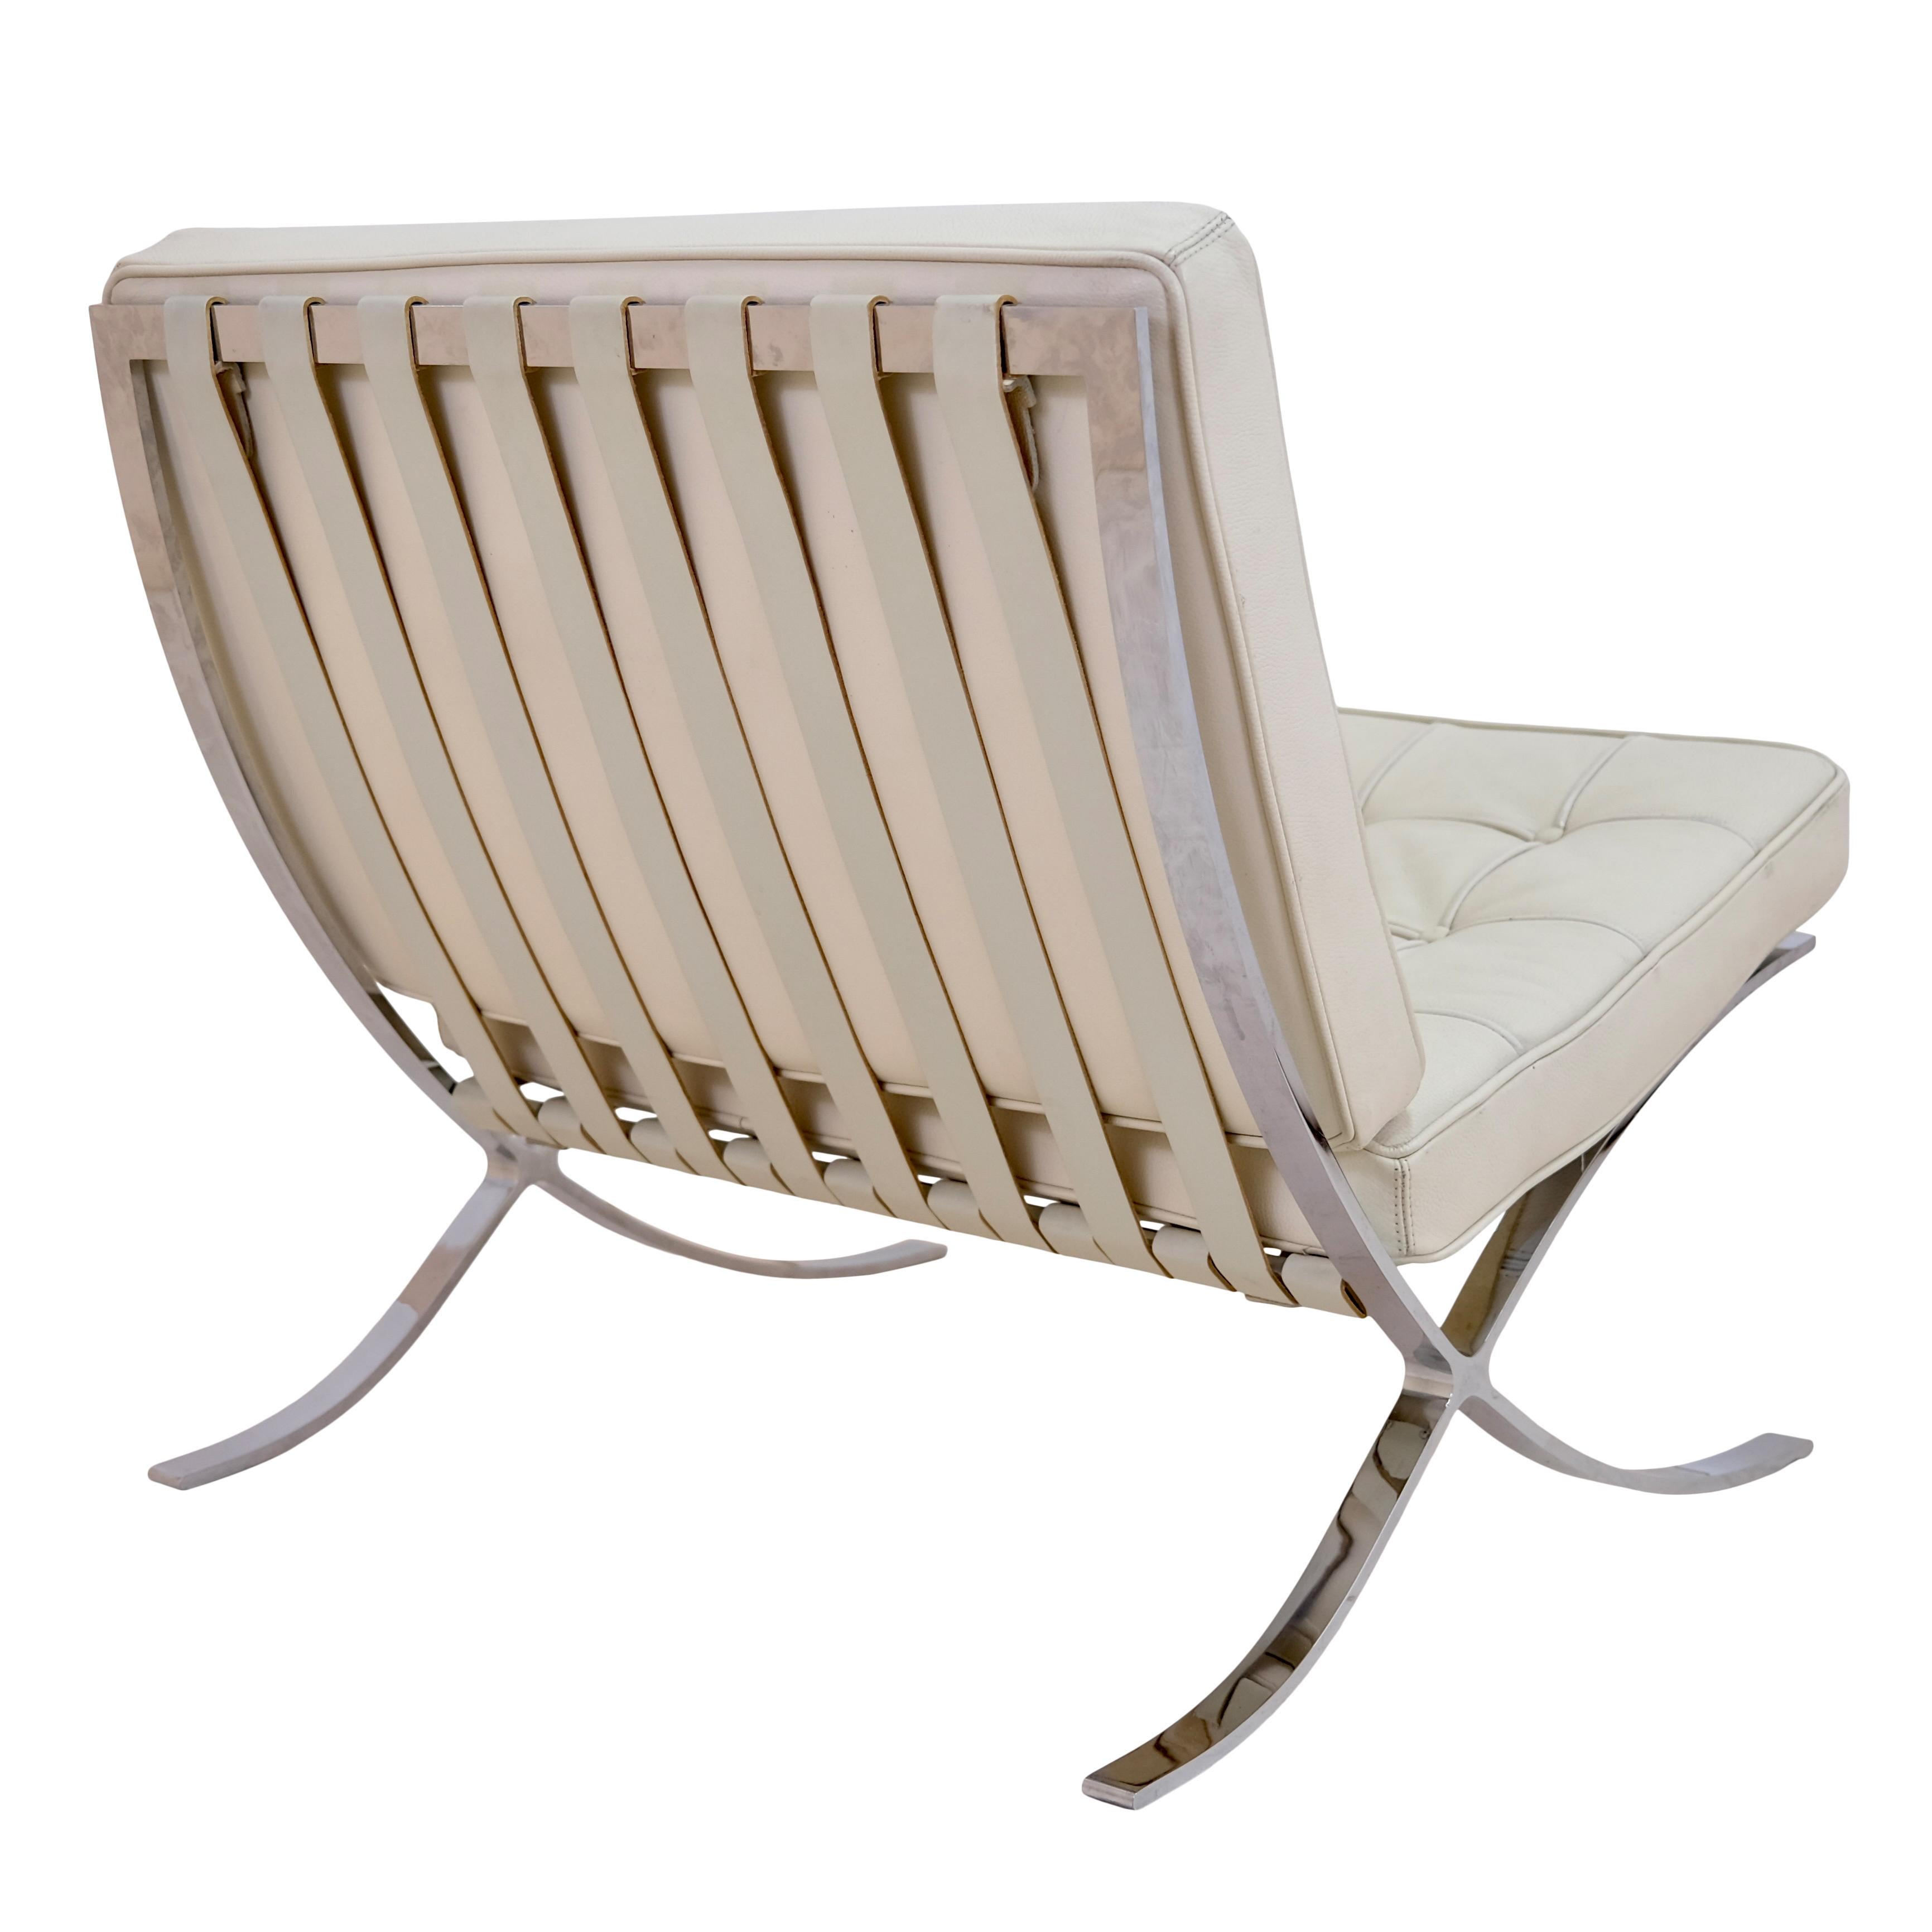 French White 1990's Barcelona Chair after Ludwig Mies van der Rohe's 1929's Model